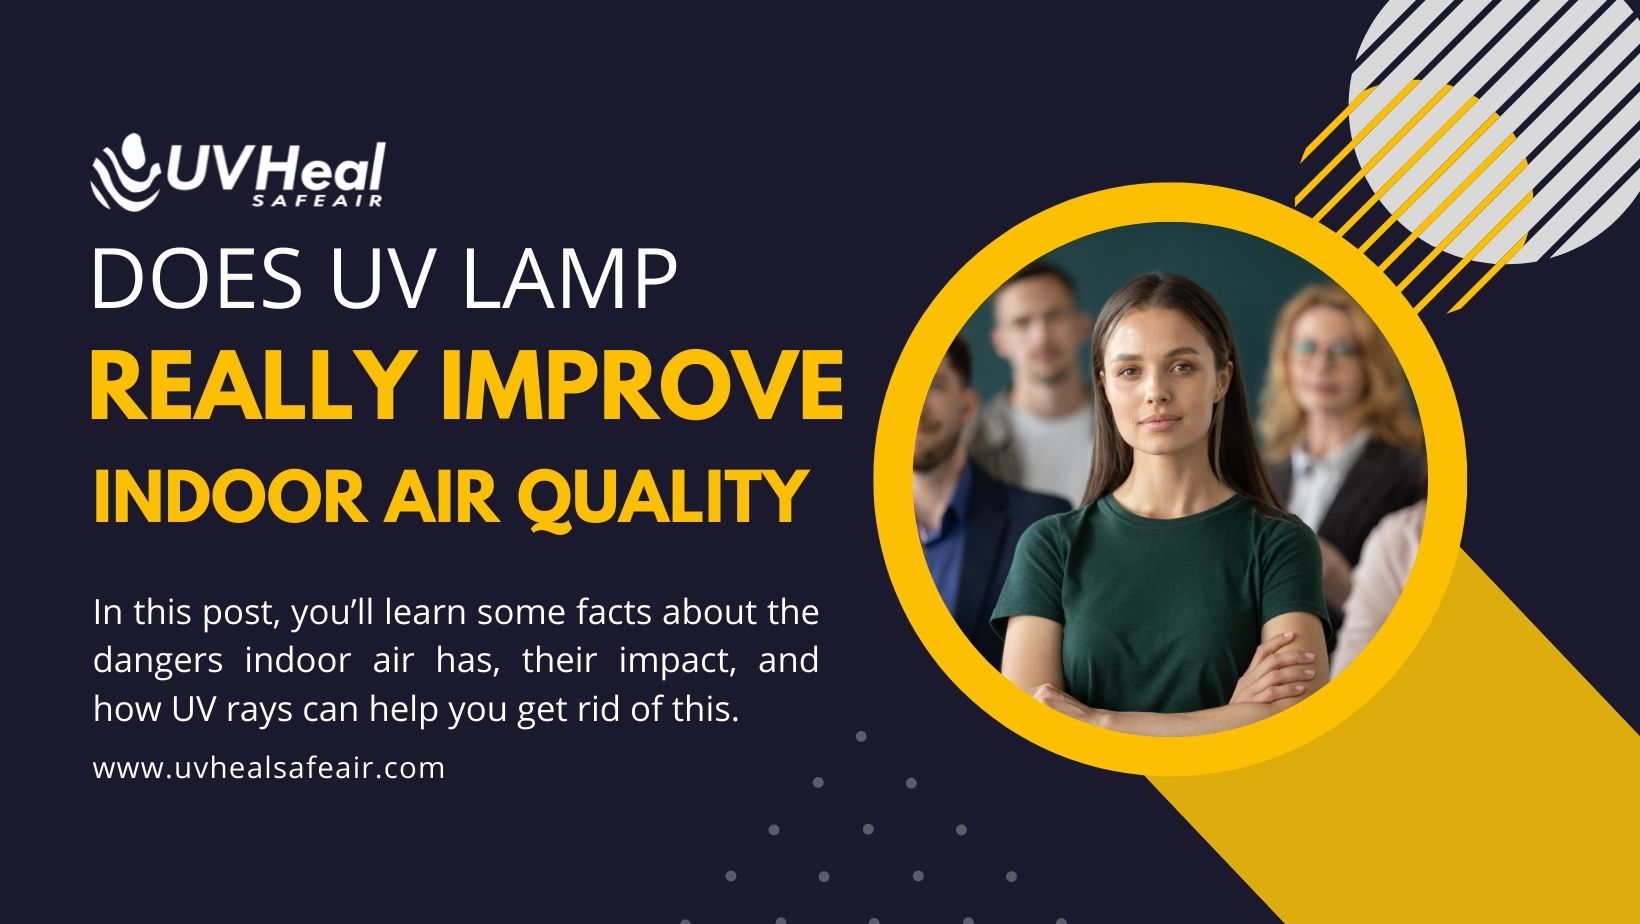 Does UV Lamp Really Improve Indoor Air Quality Does UV Lamp Really Improve Indoor Air Quality? UVGI System work style and features